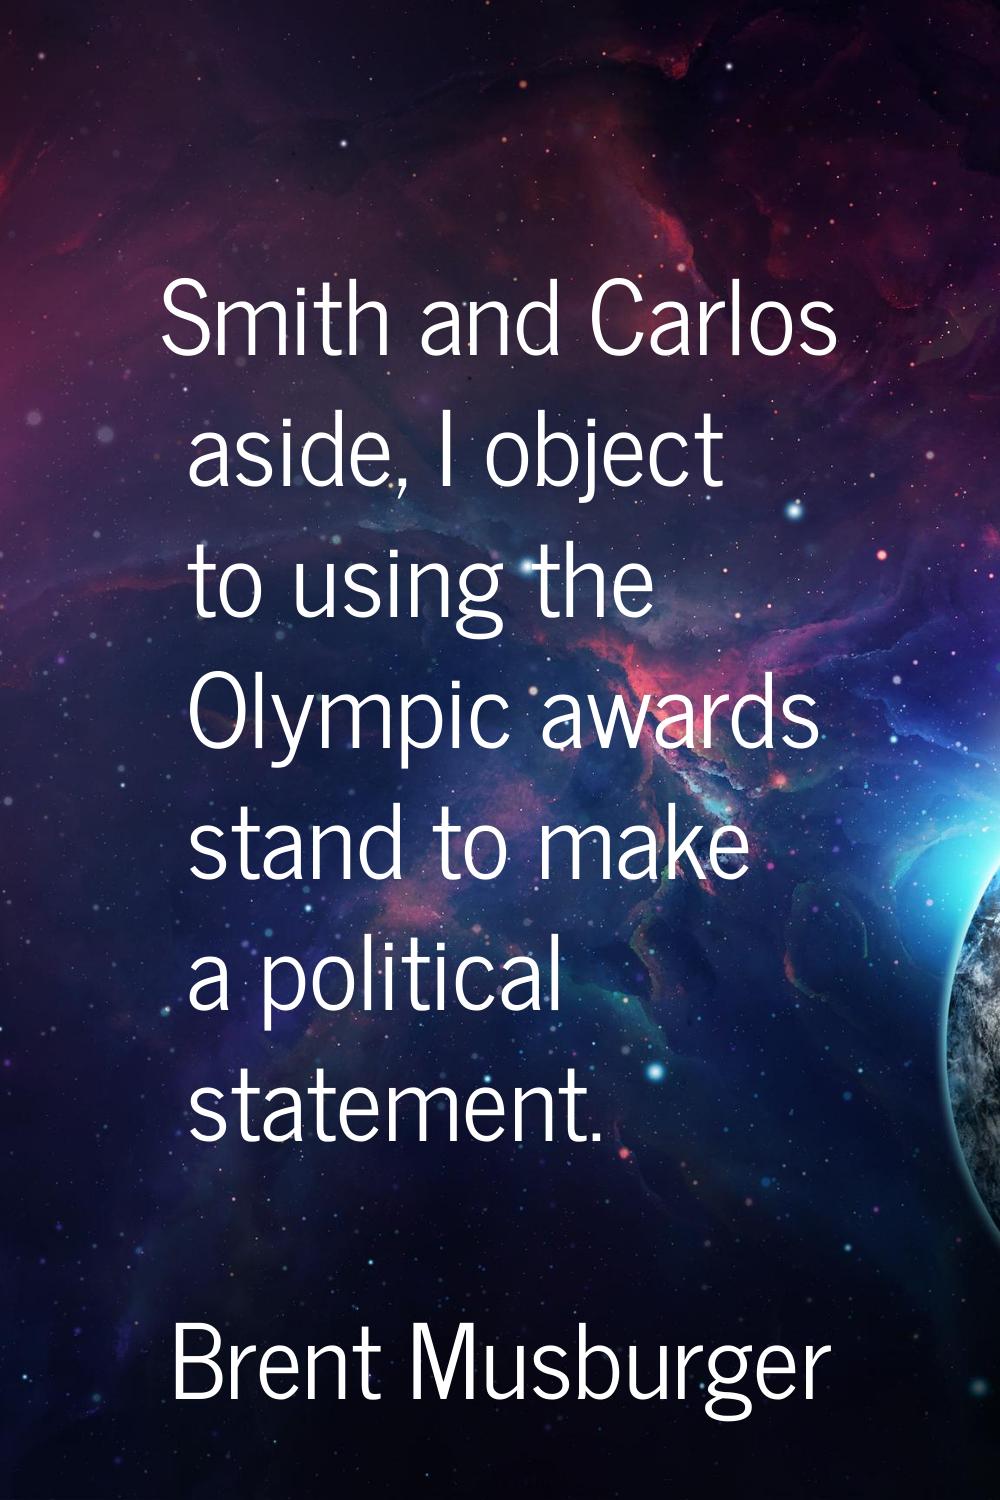 Smith and Carlos aside, I object to using the Olympic awards stand to make a political statement.